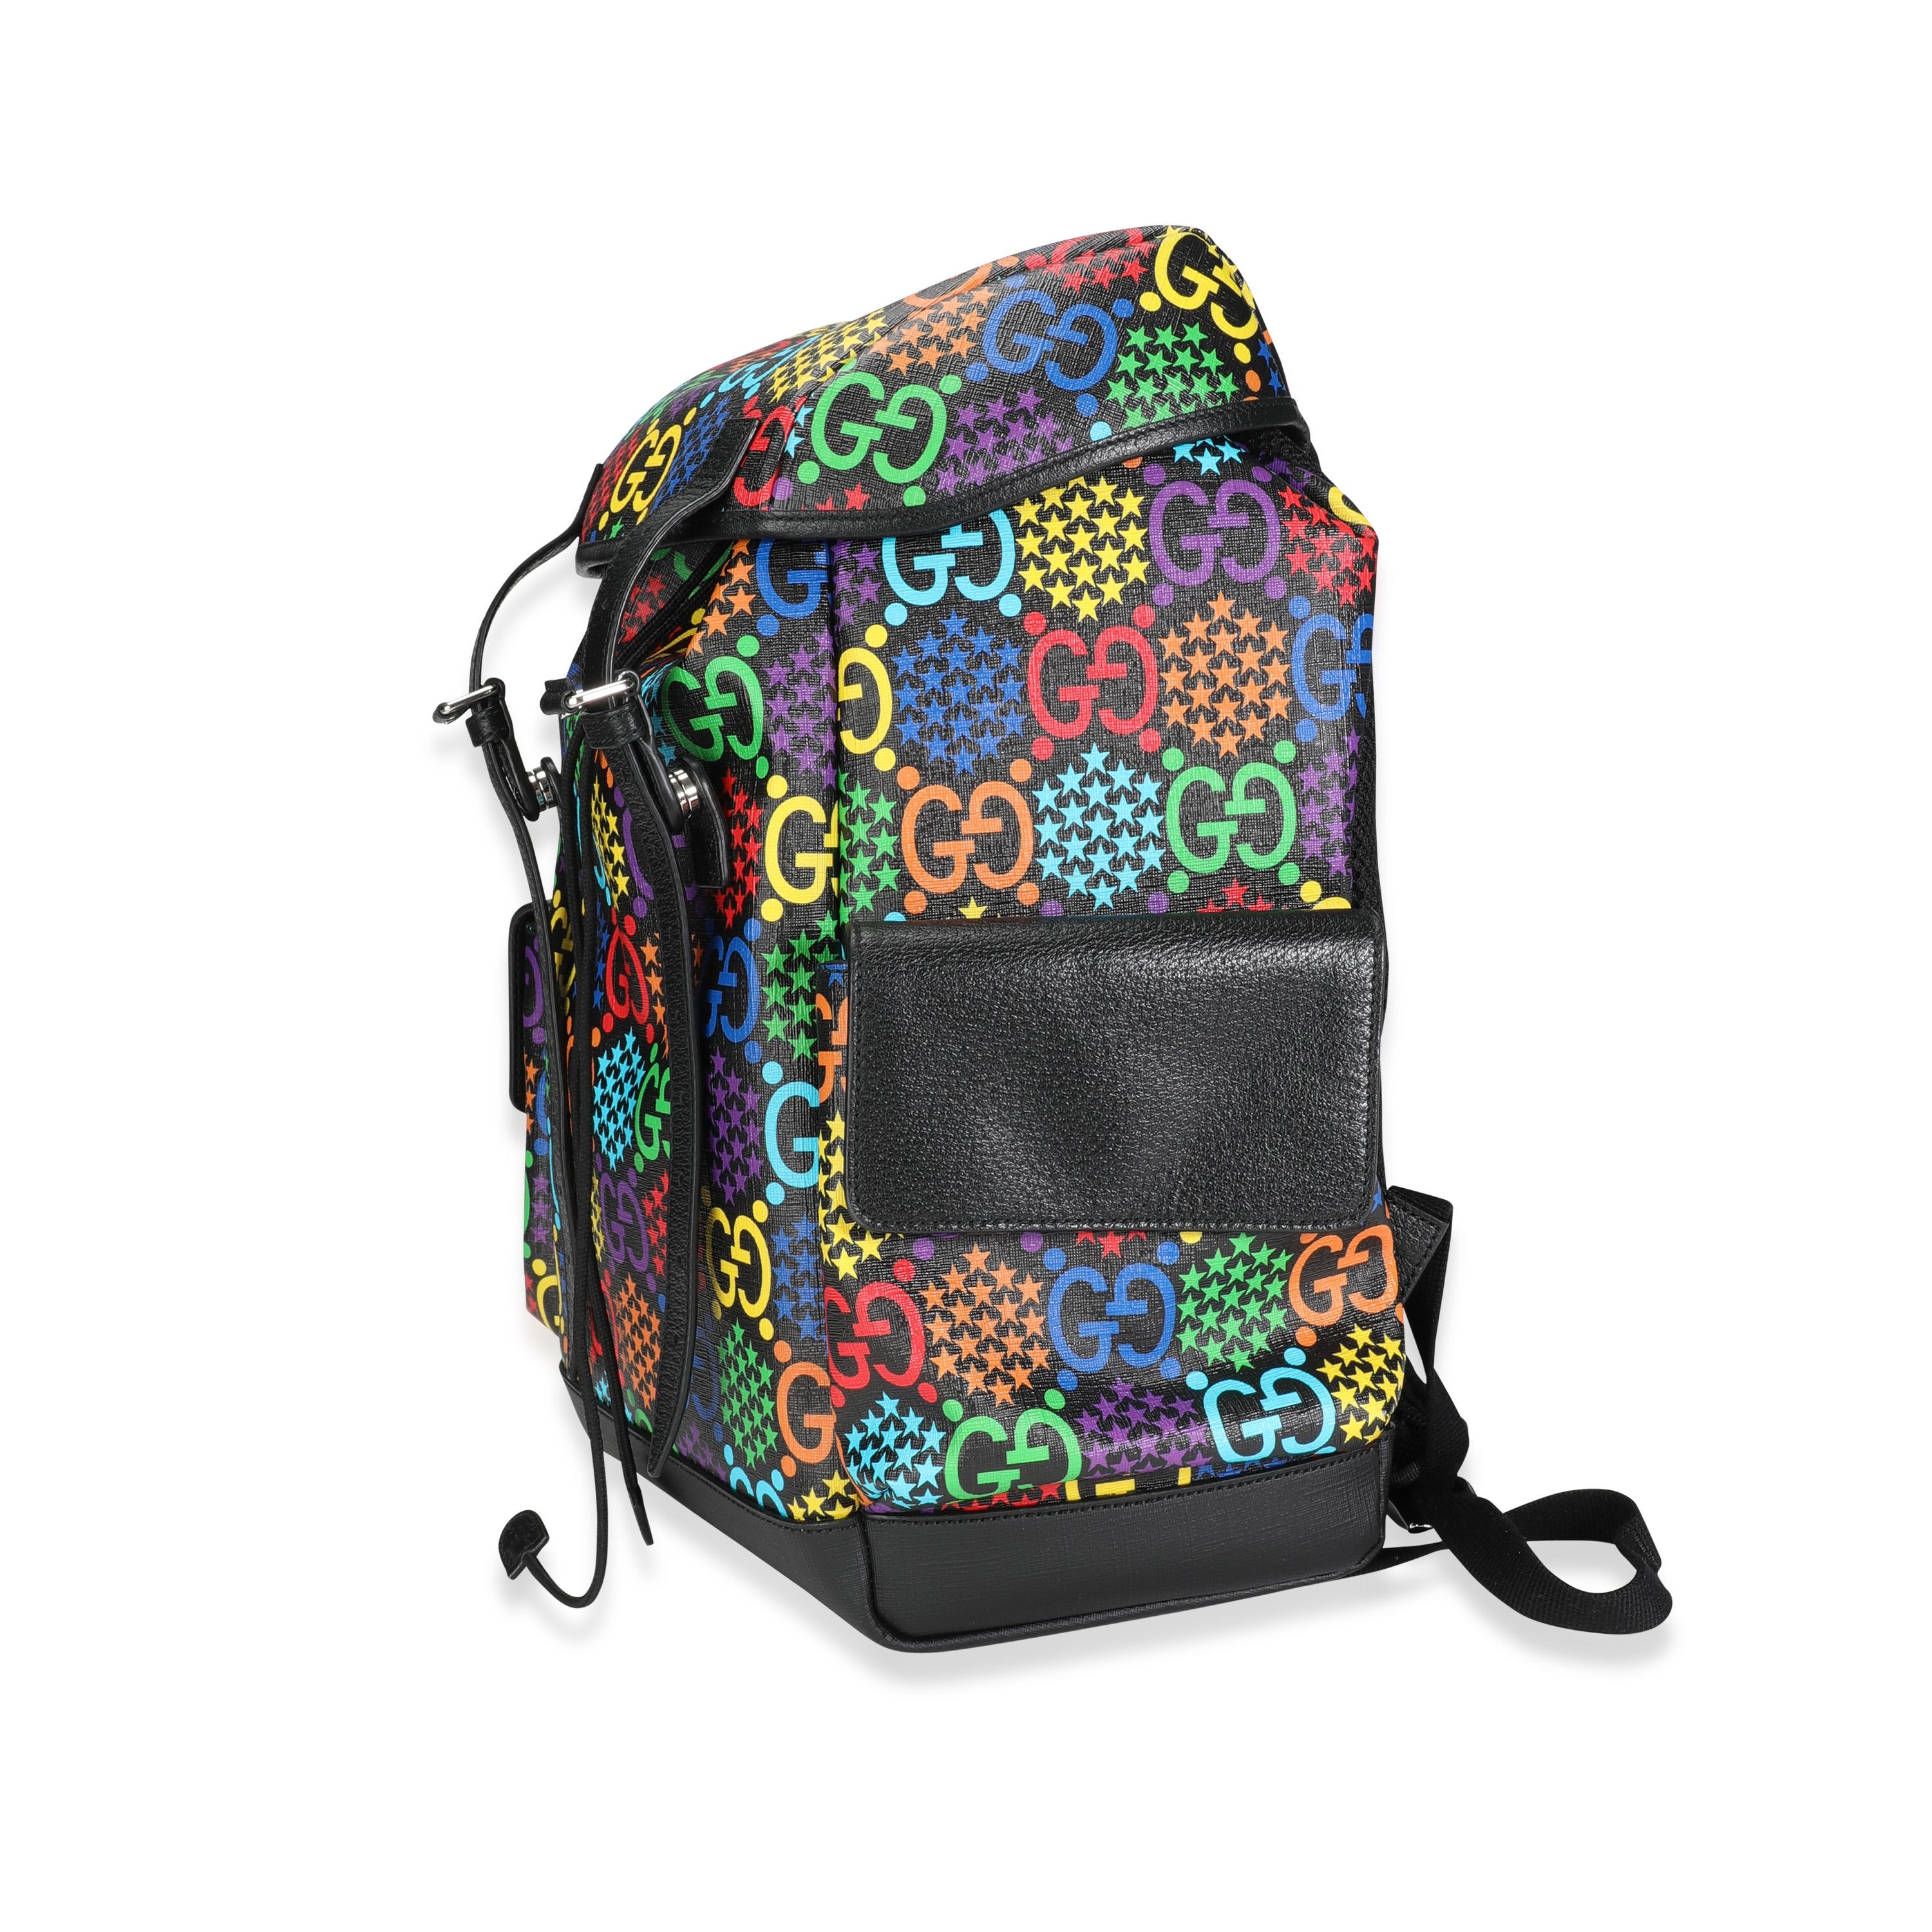 Listing Title: Gucci Limited Edition 'Psychedelic' Rainbow GG Supreme Canvas Medium Backpack
SKU: 117578
MSRP: 2390.00
Condition: Pre-owned (3000)
Handbag Condition: Excellent
Condition Comments: Excellent Condition. No visible signs of wear.
Brand: